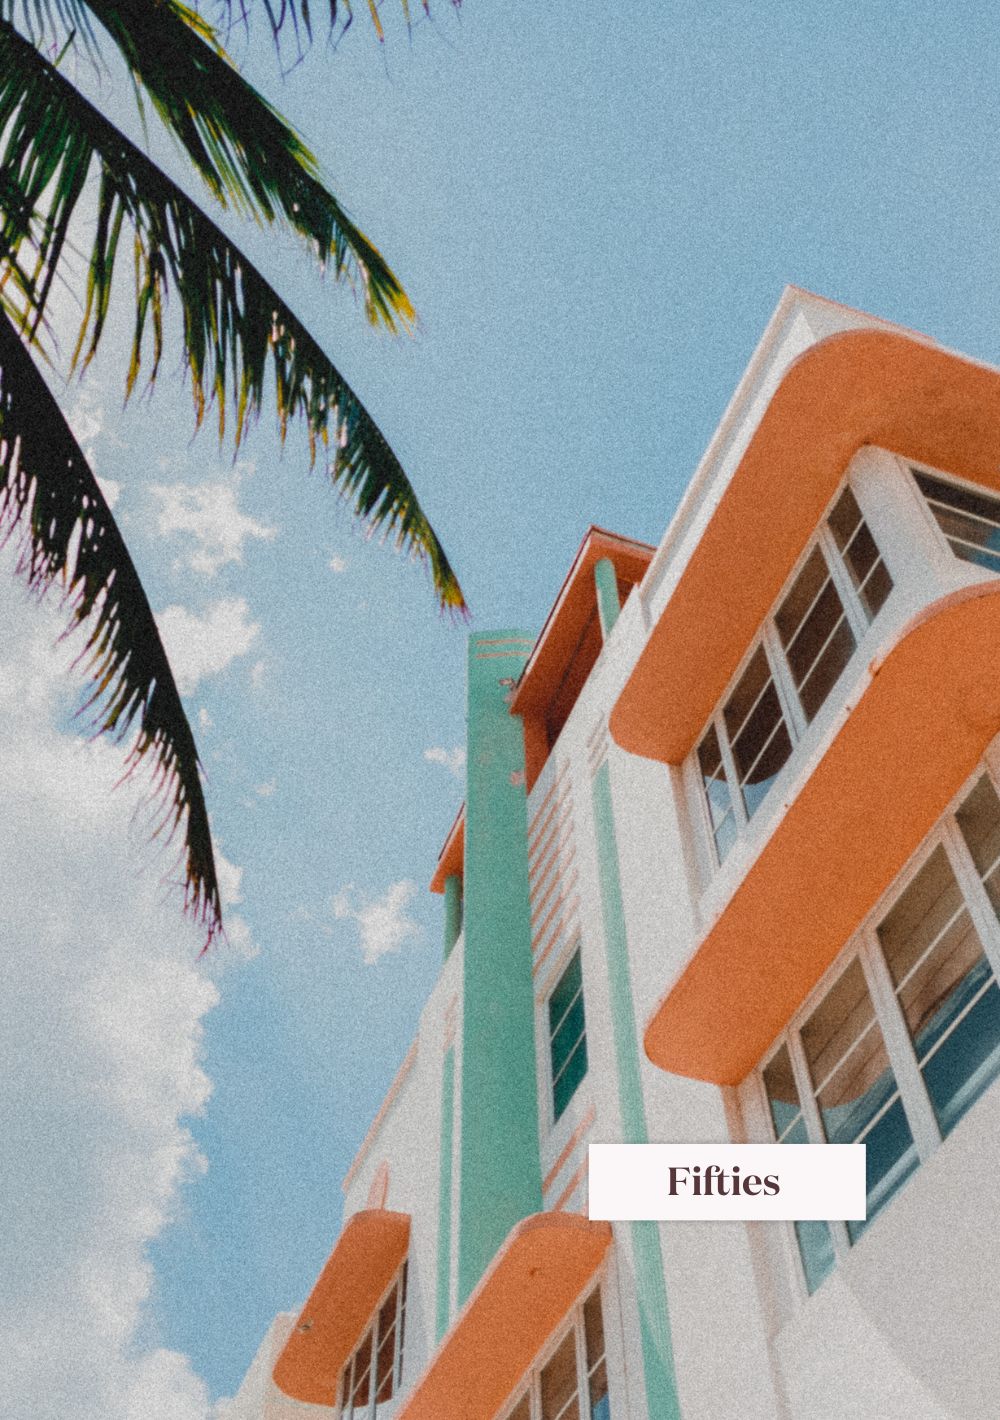 Fifties-oldies-preset-collaction-after